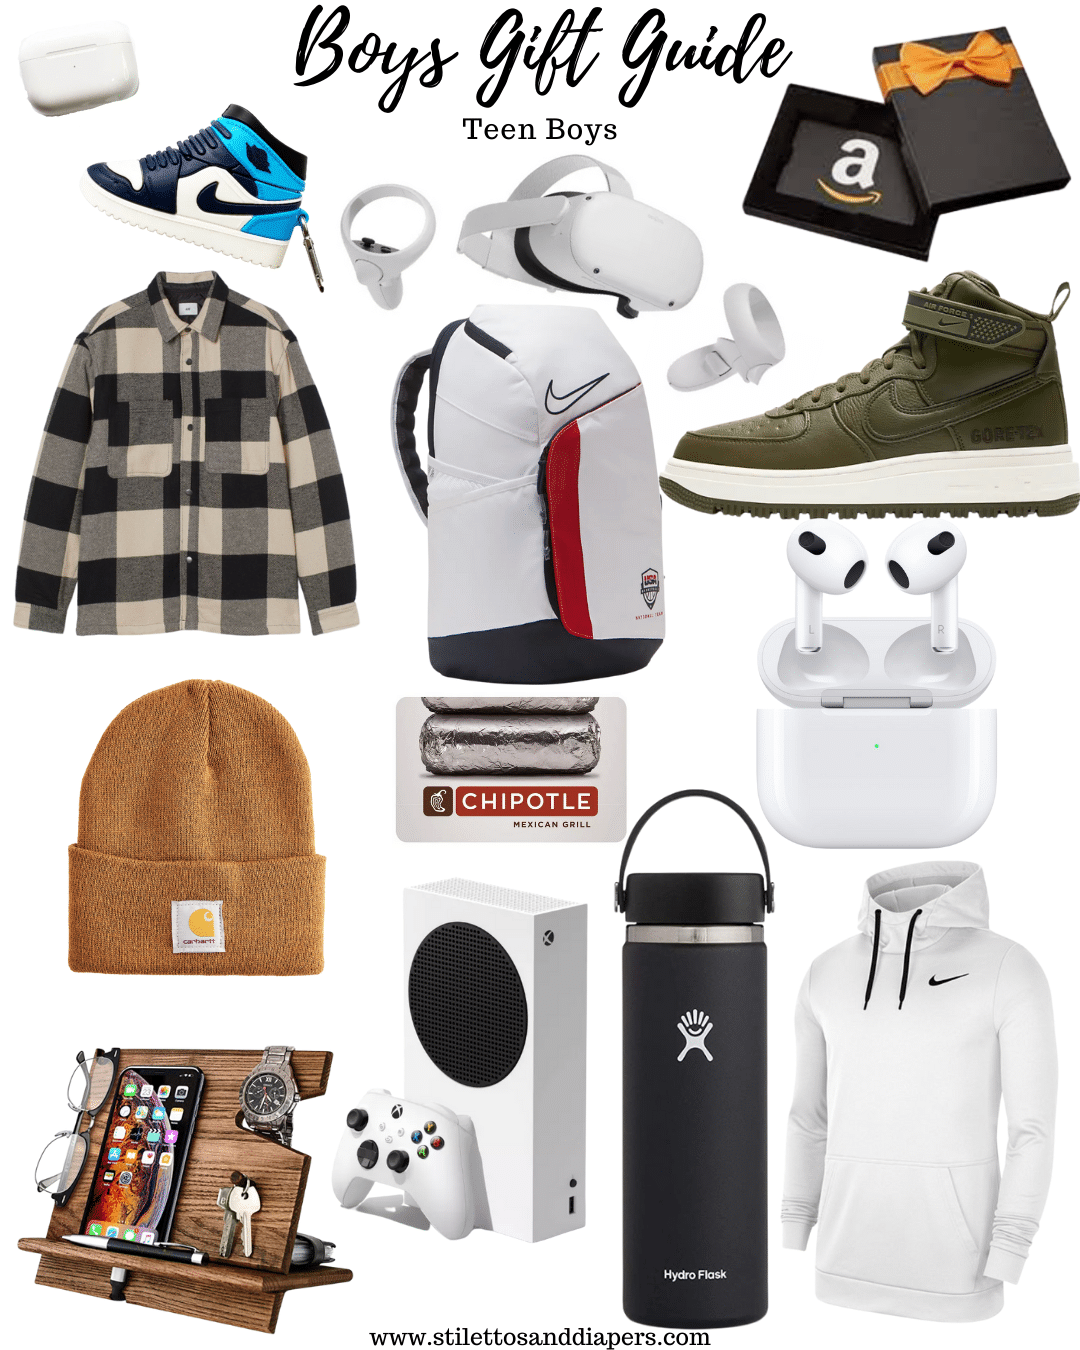 2021 Boys Gift Guide Teen Boys, Stilettos and Diapers